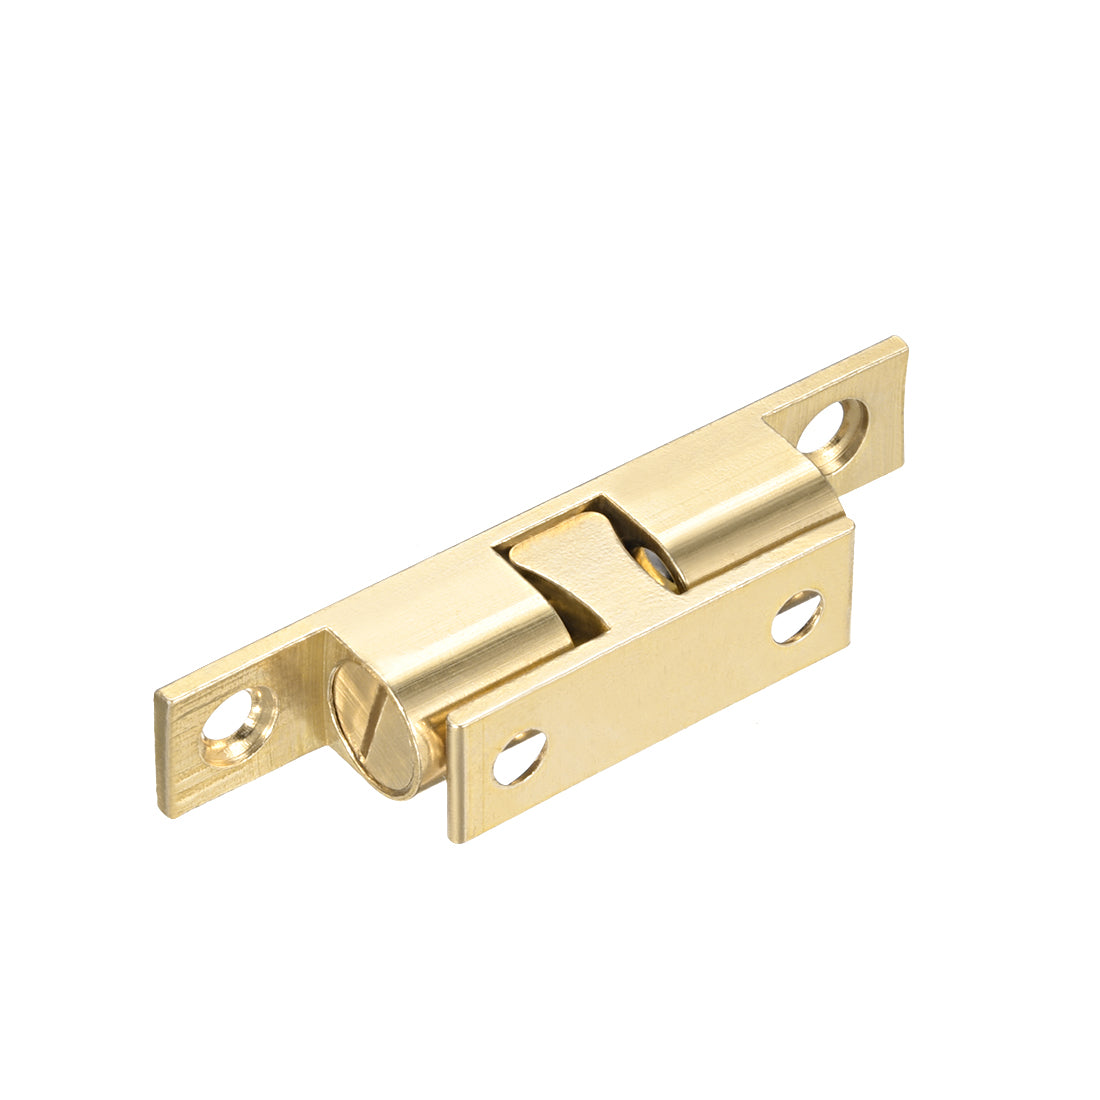 uxcell Uxcell Cabinet Door Closet Brass Double Ball Catch Tension Latch 70mm Length Gold Tone 2pcs